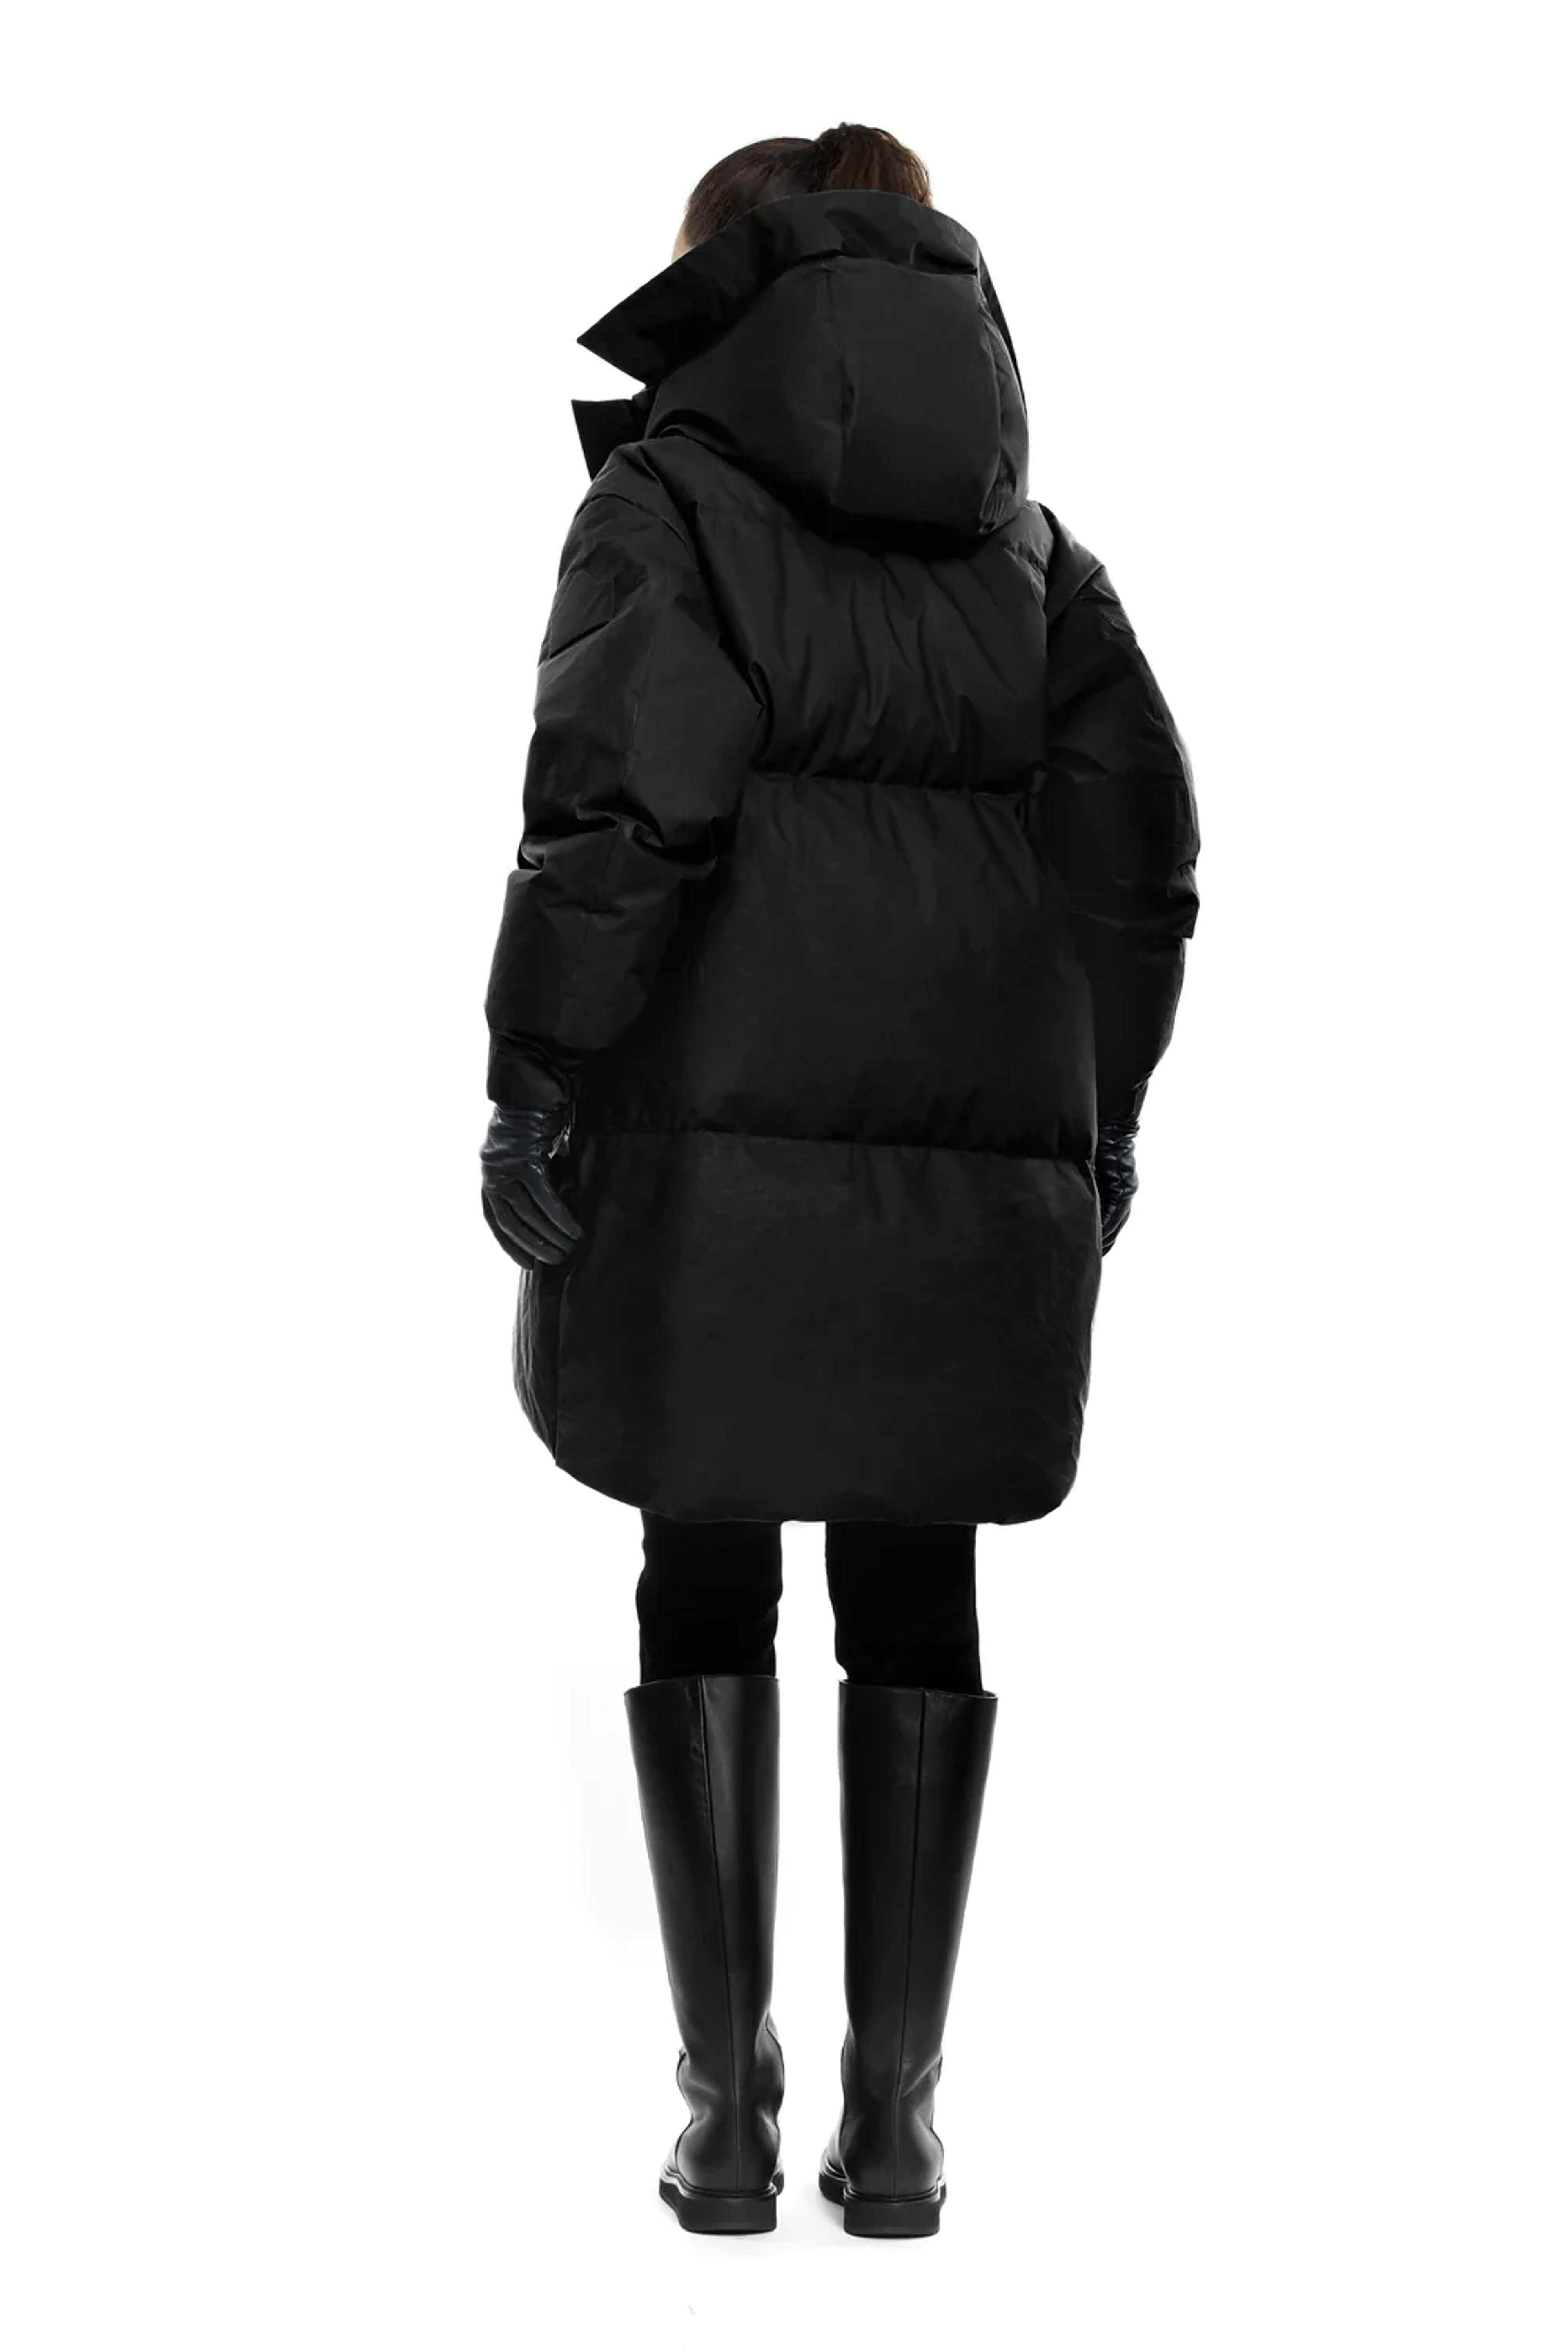 The Parka – Olmsted Outerwear